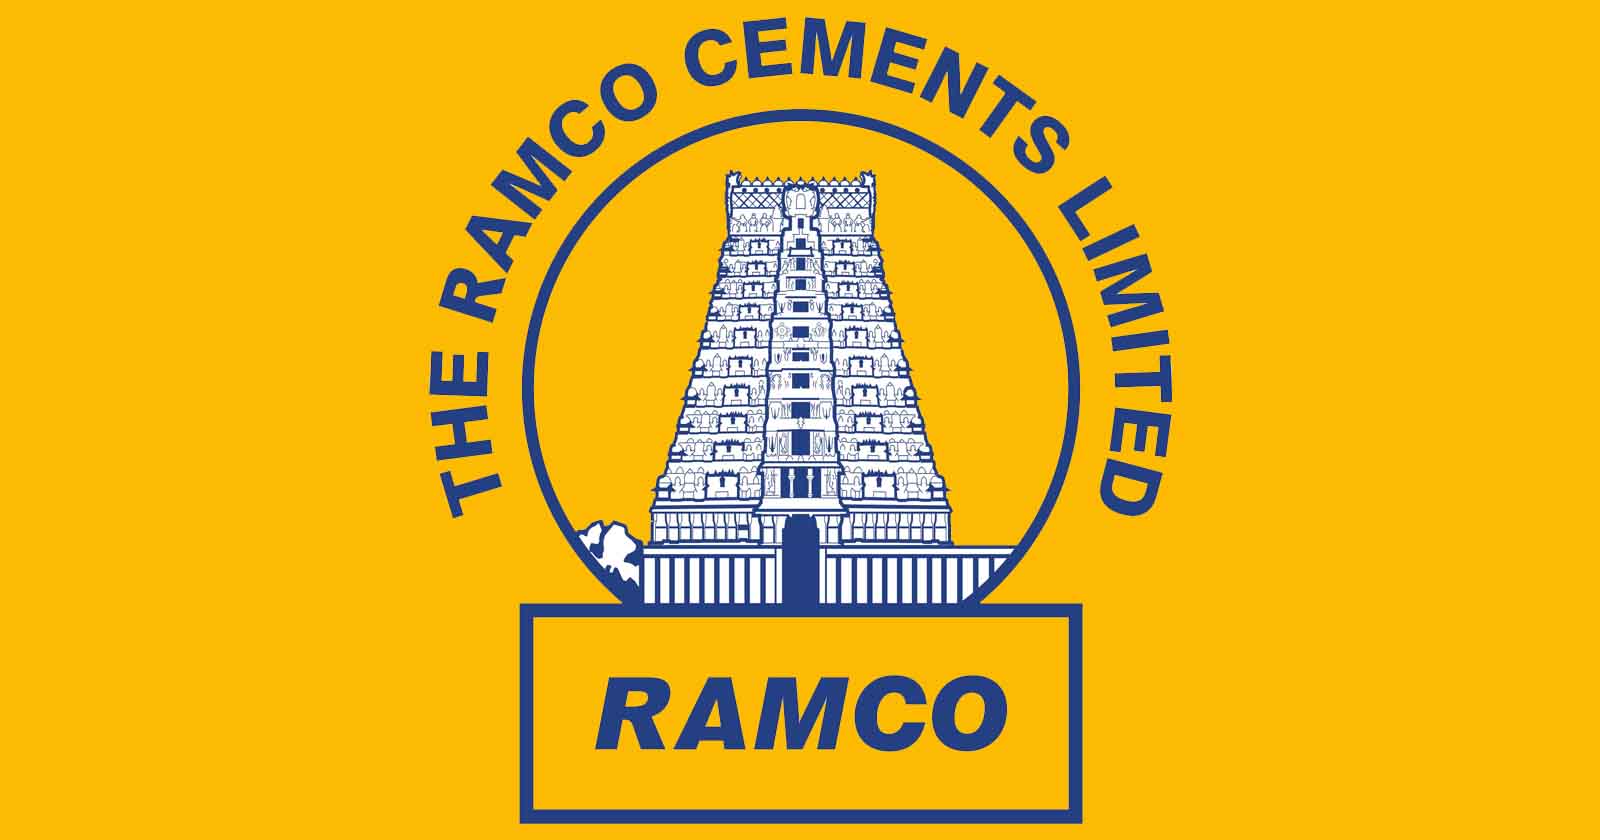 Ramco Cement - Relief to Ramco Cement - Denial of CENVAT credits - CENVAT credits - Service Tax paid on Outward Transportation - Outward Transportation of Finished Products - CESTAT Rules - TAXSCAN